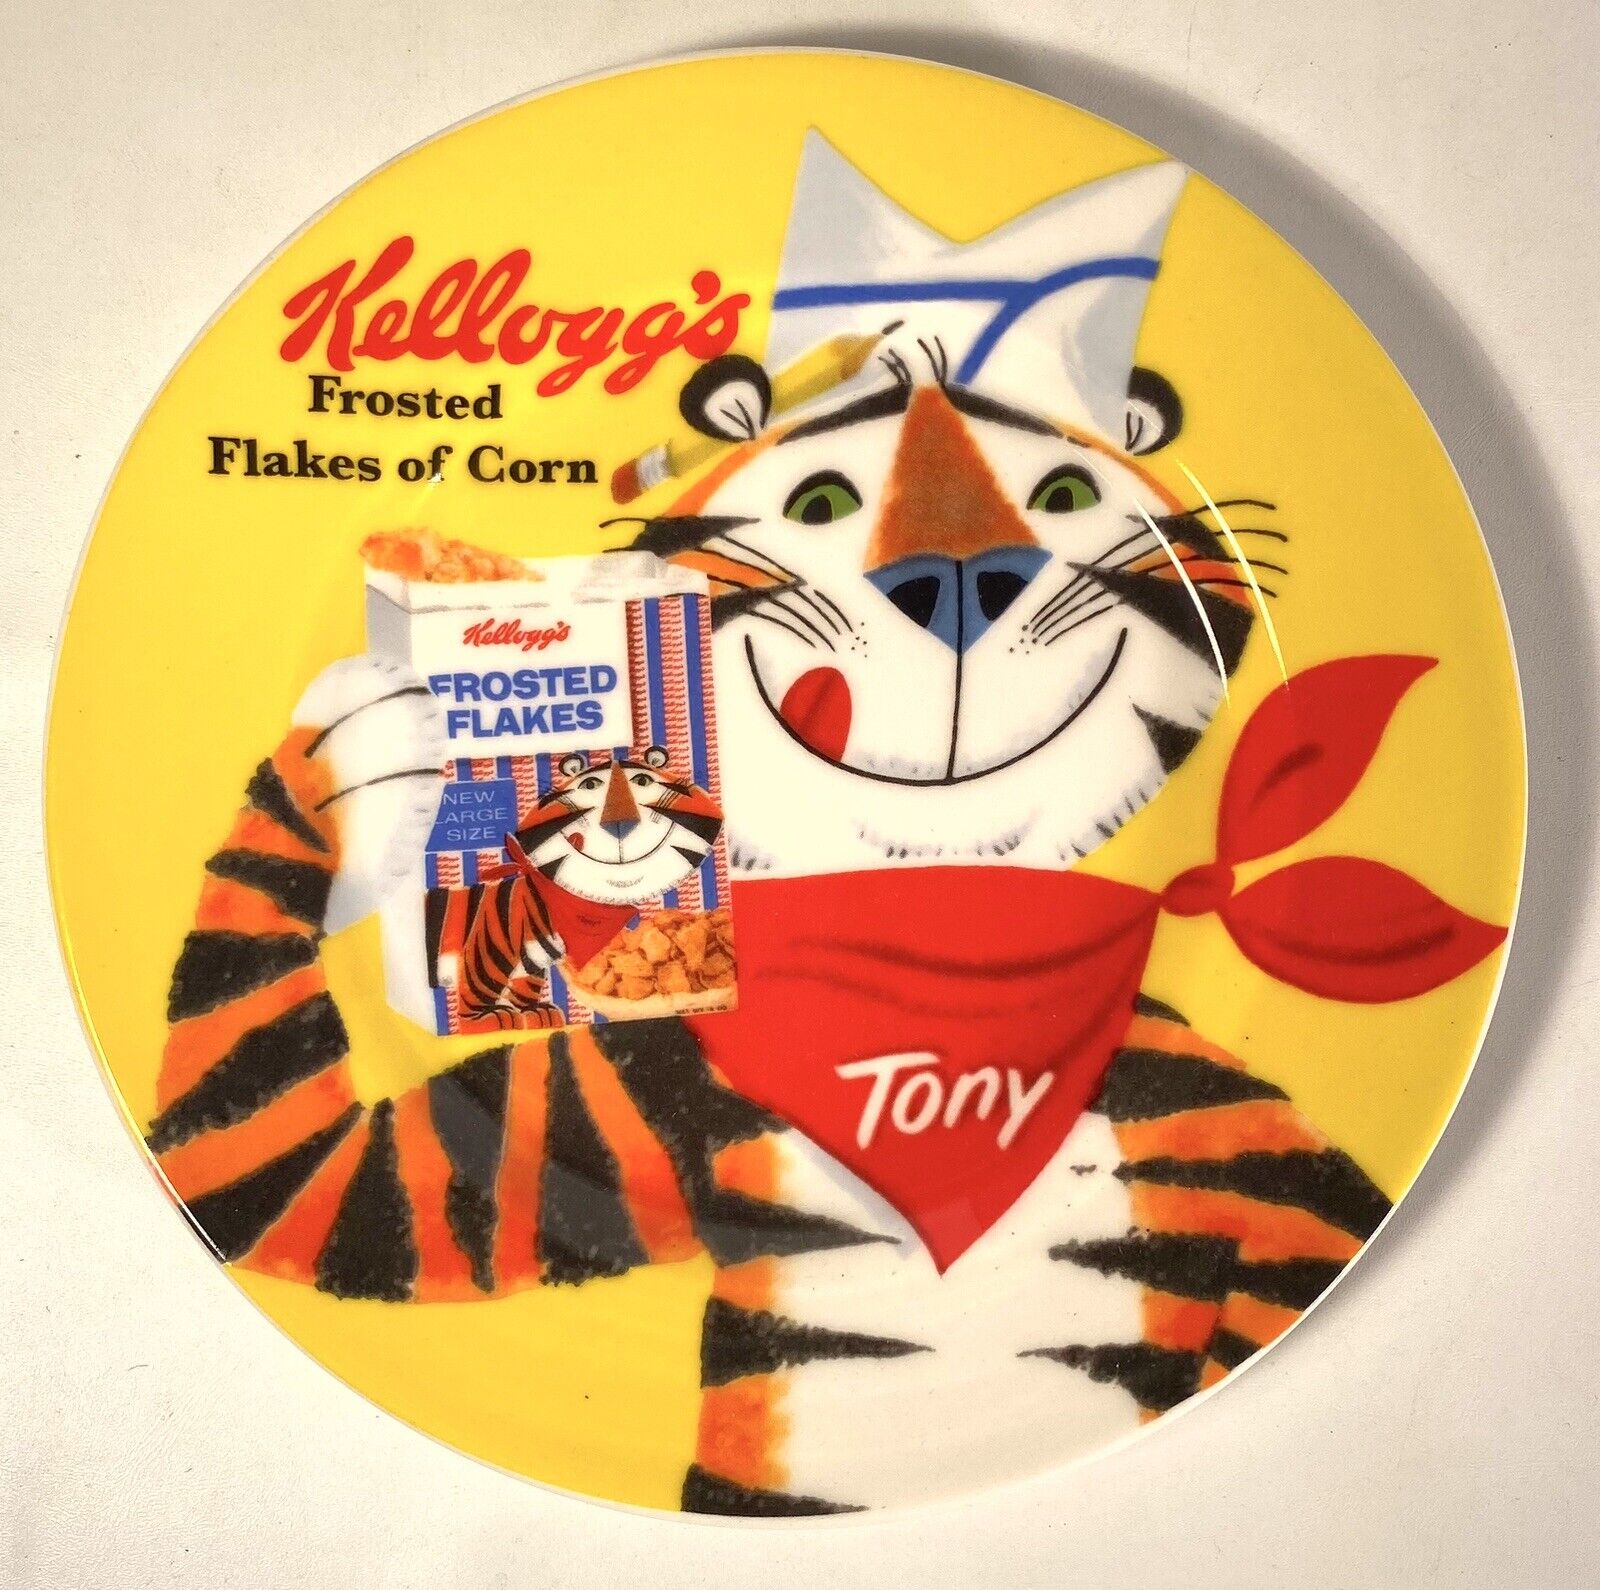 Vintage NEW (2005) Kellogg's Tony the Tiger Frosted Flakes Ceramic Plate 3419010